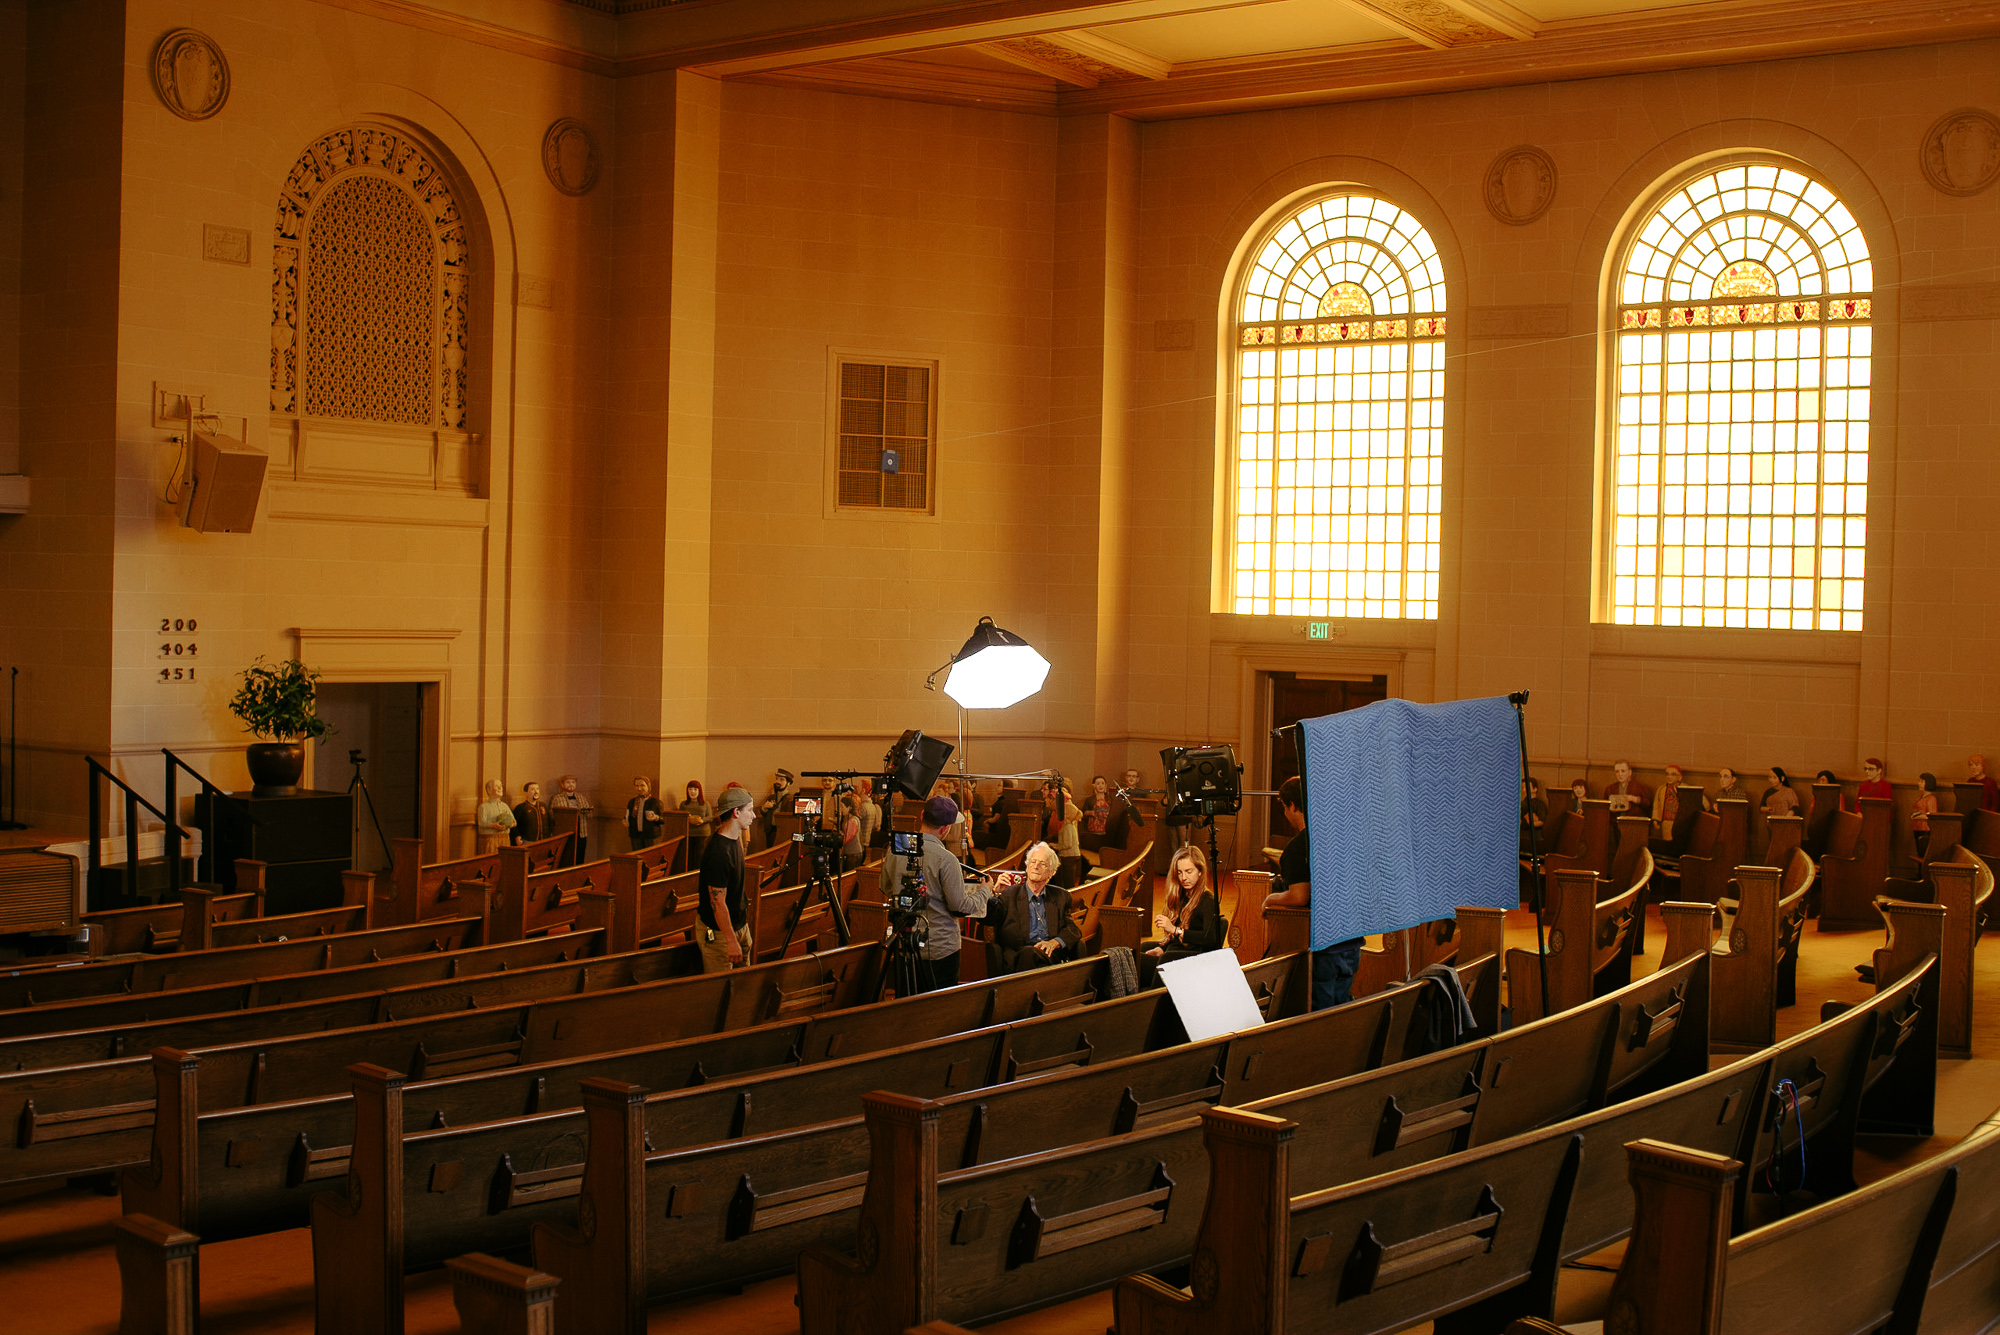 Filming in the Great Room of the old church that's home to the Internet Archive.